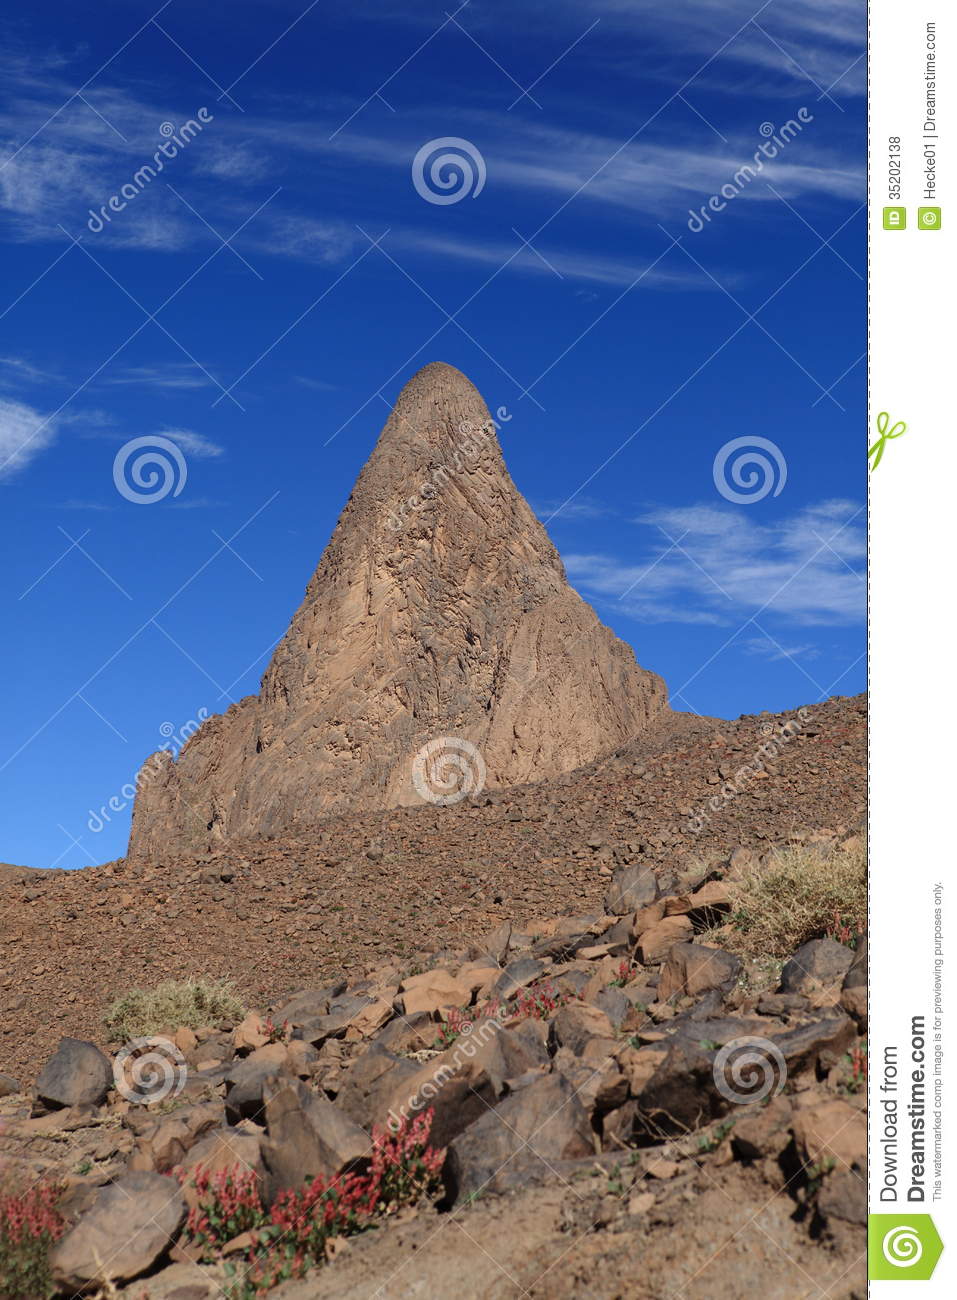 Hoggar Mountains clipart #18, Download drawings